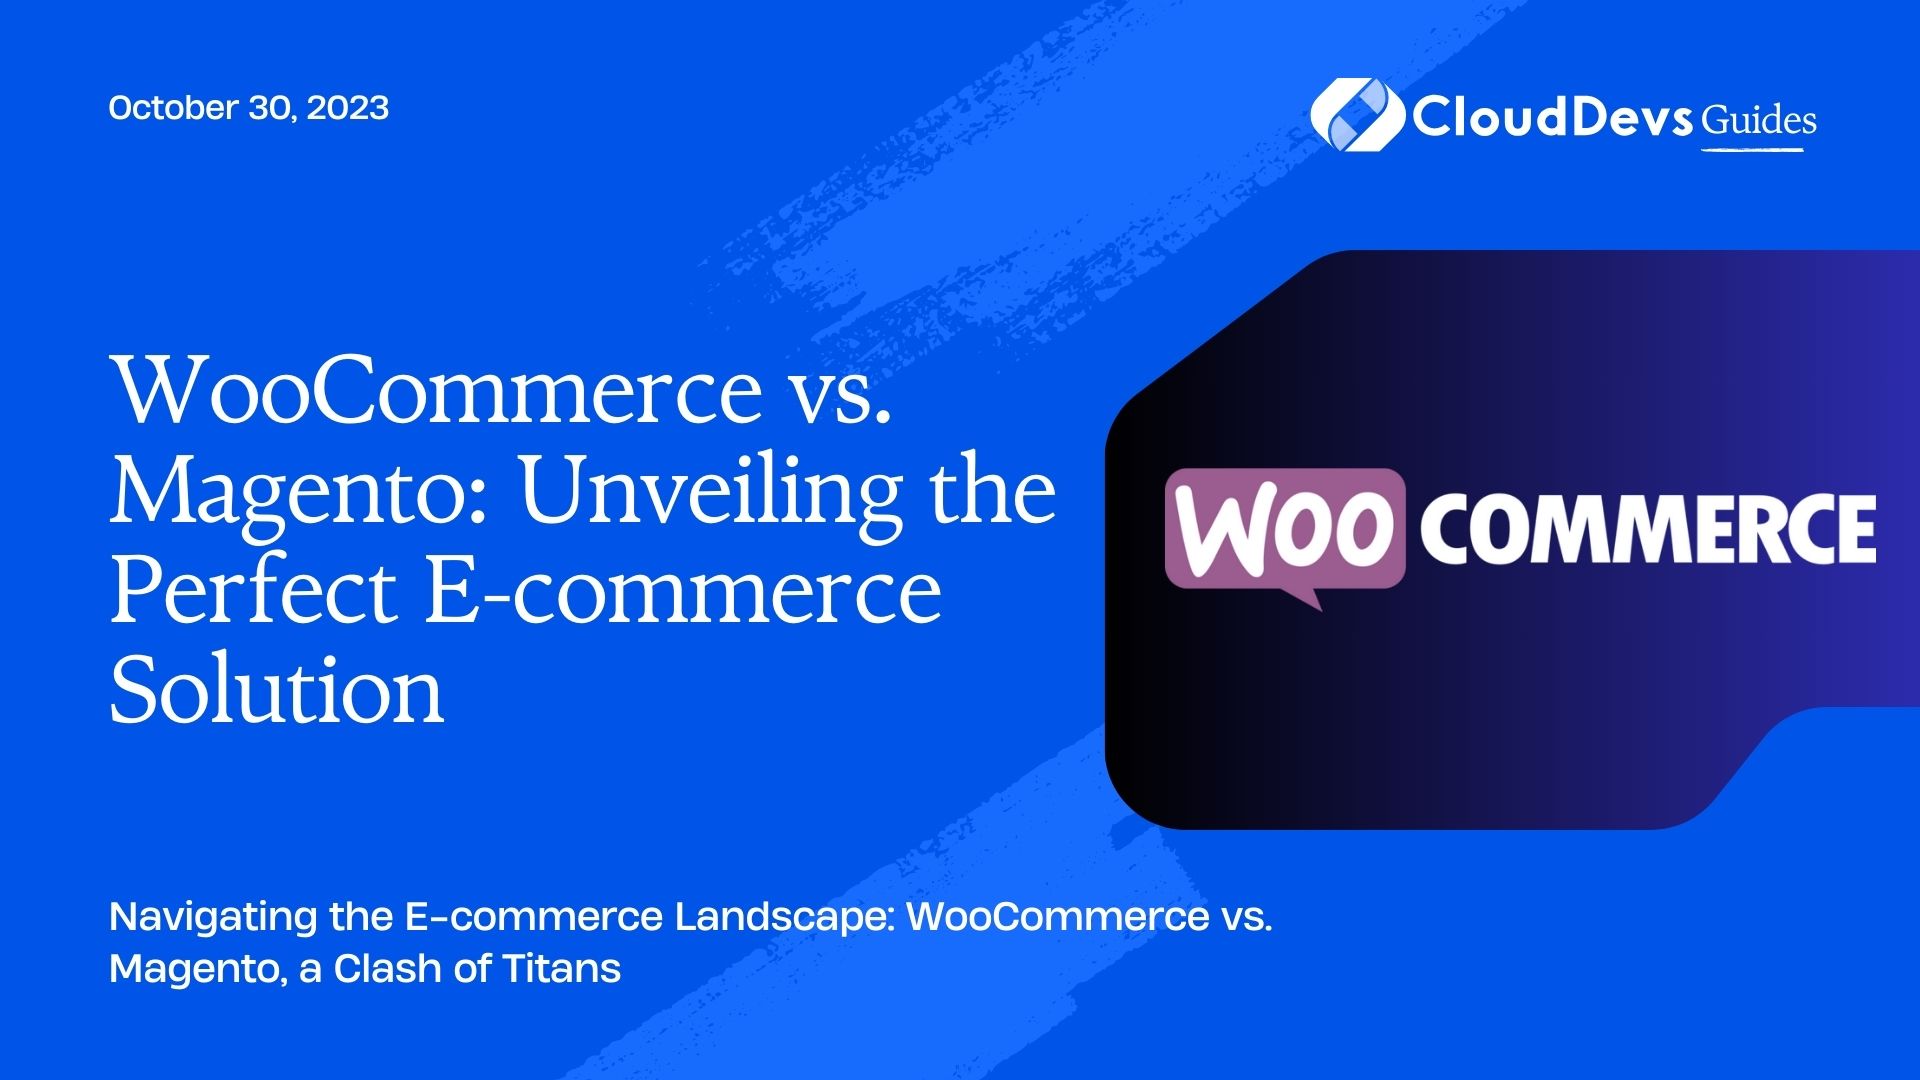 WooCommerce vs. Magento: Unveiling the Perfect E-commerce Solution